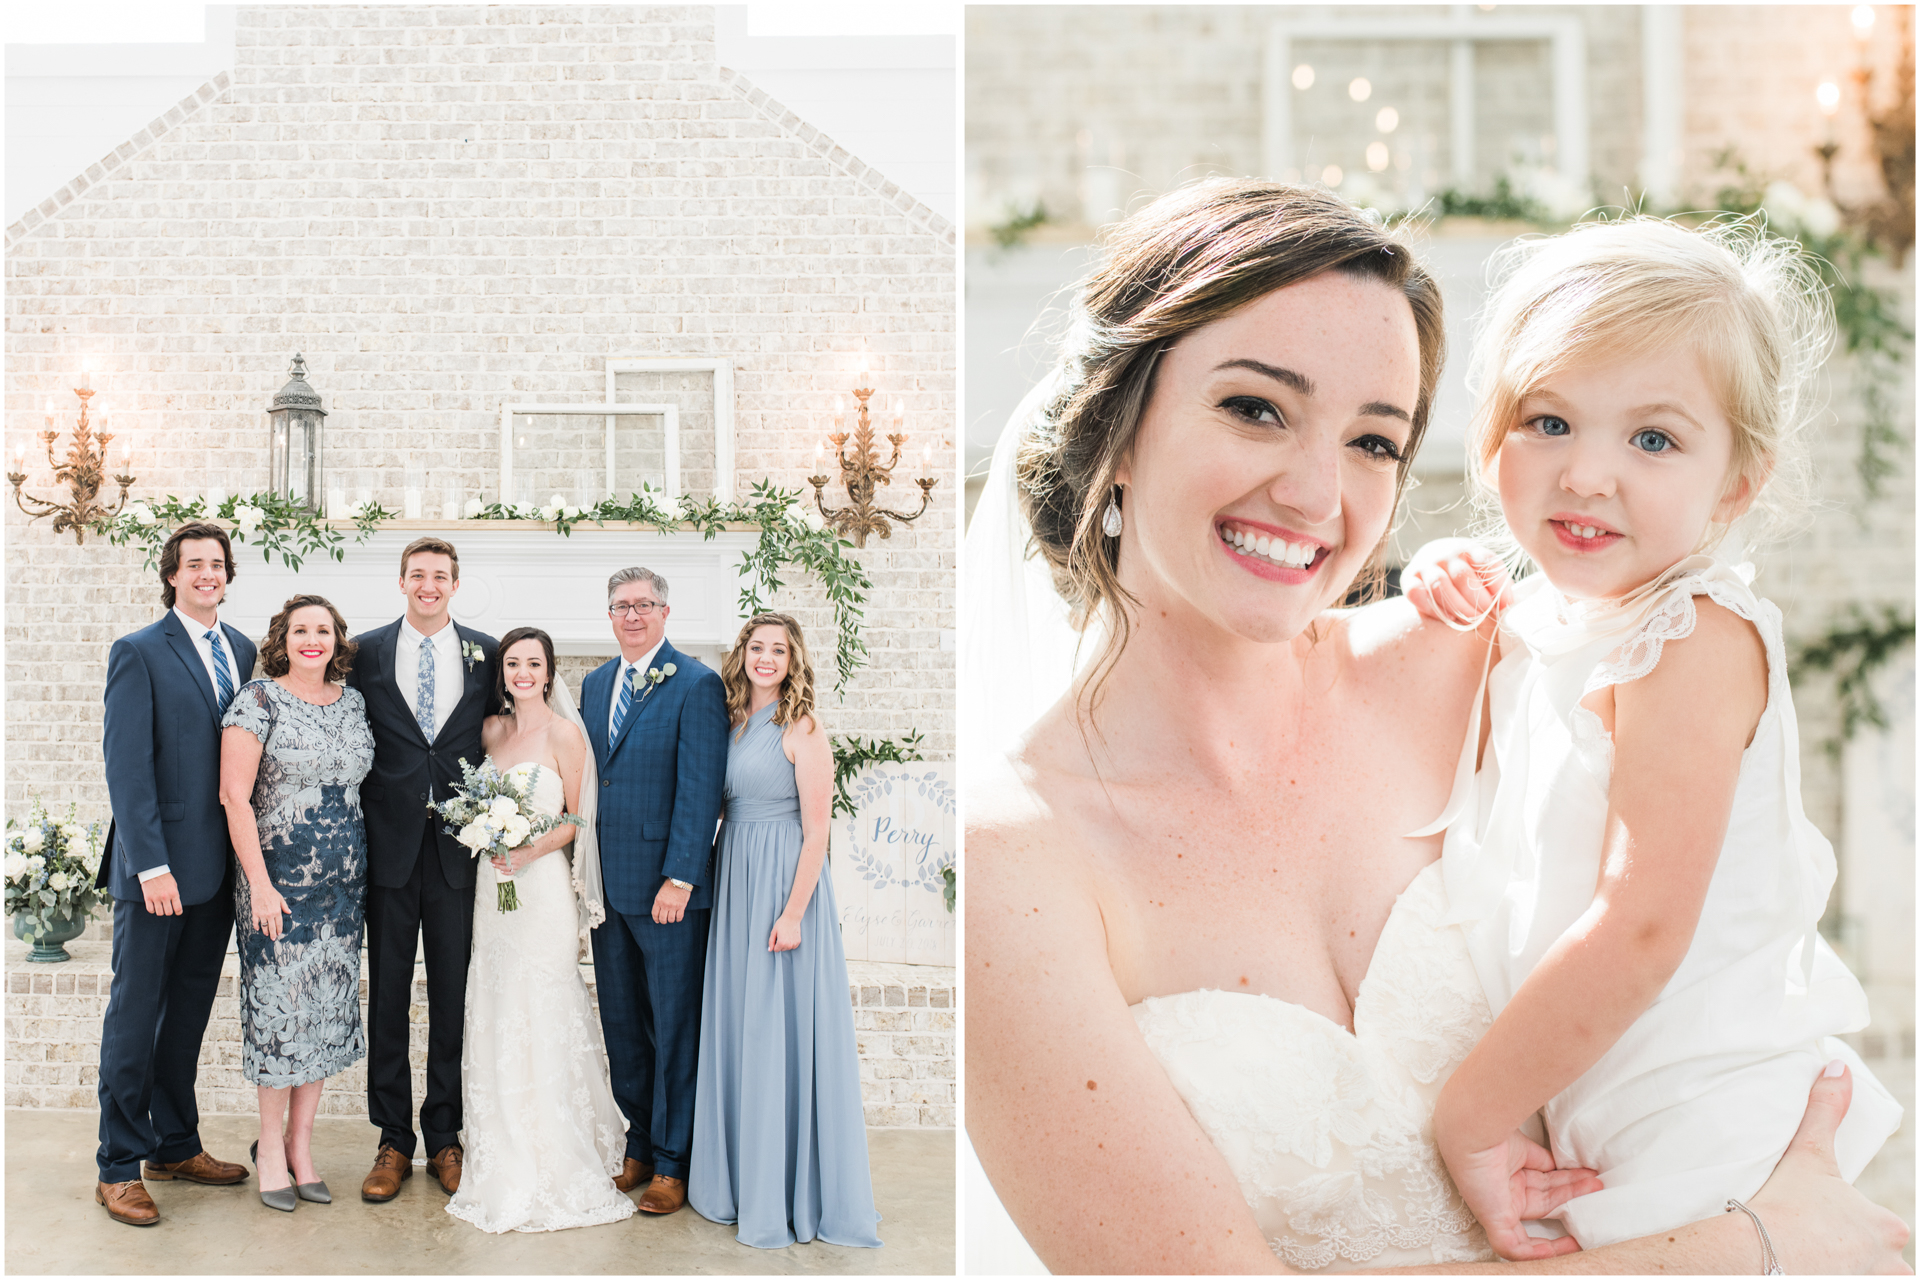 Indoor Family portraits in front of fireplace - white barn wedding